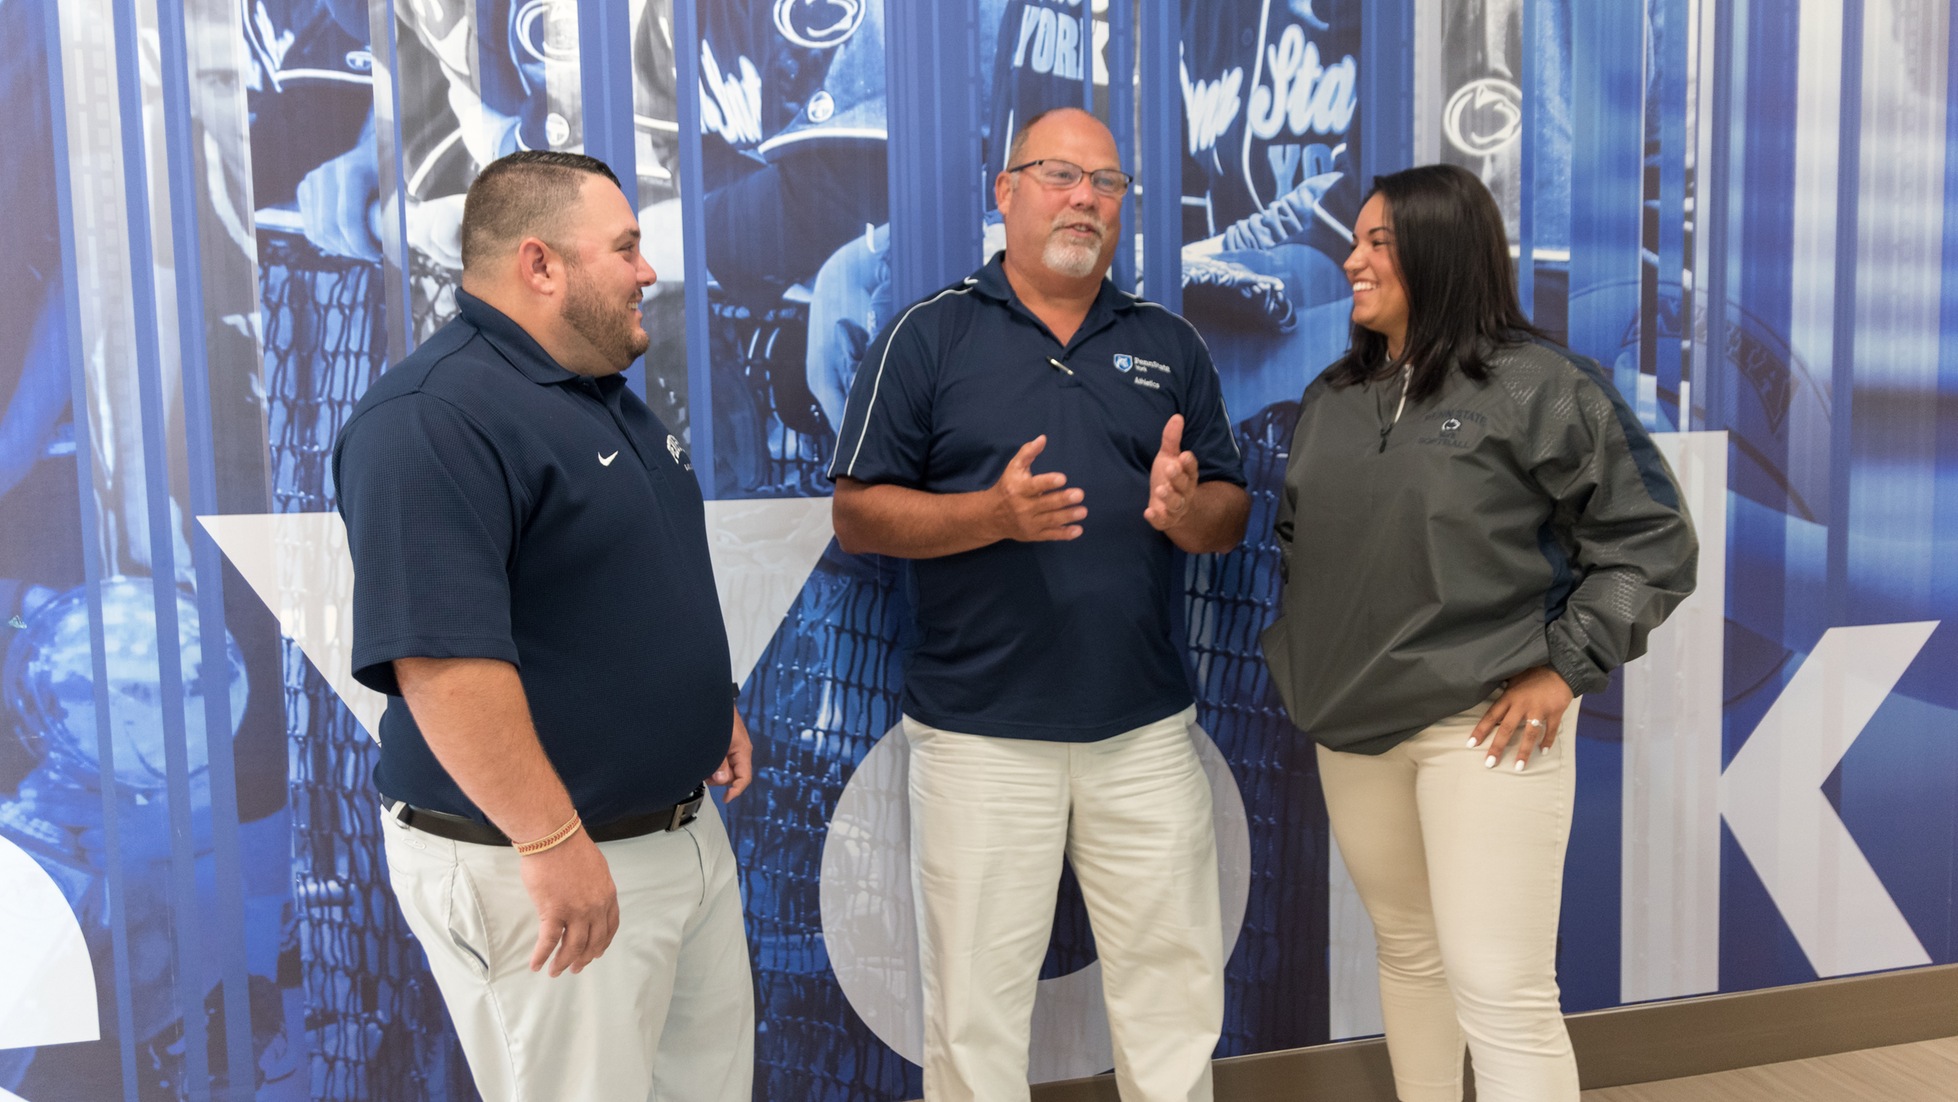 Athletic Director Jeff Barkdoll, center, with Coach Shaeffer, left, and Coach Patillo.